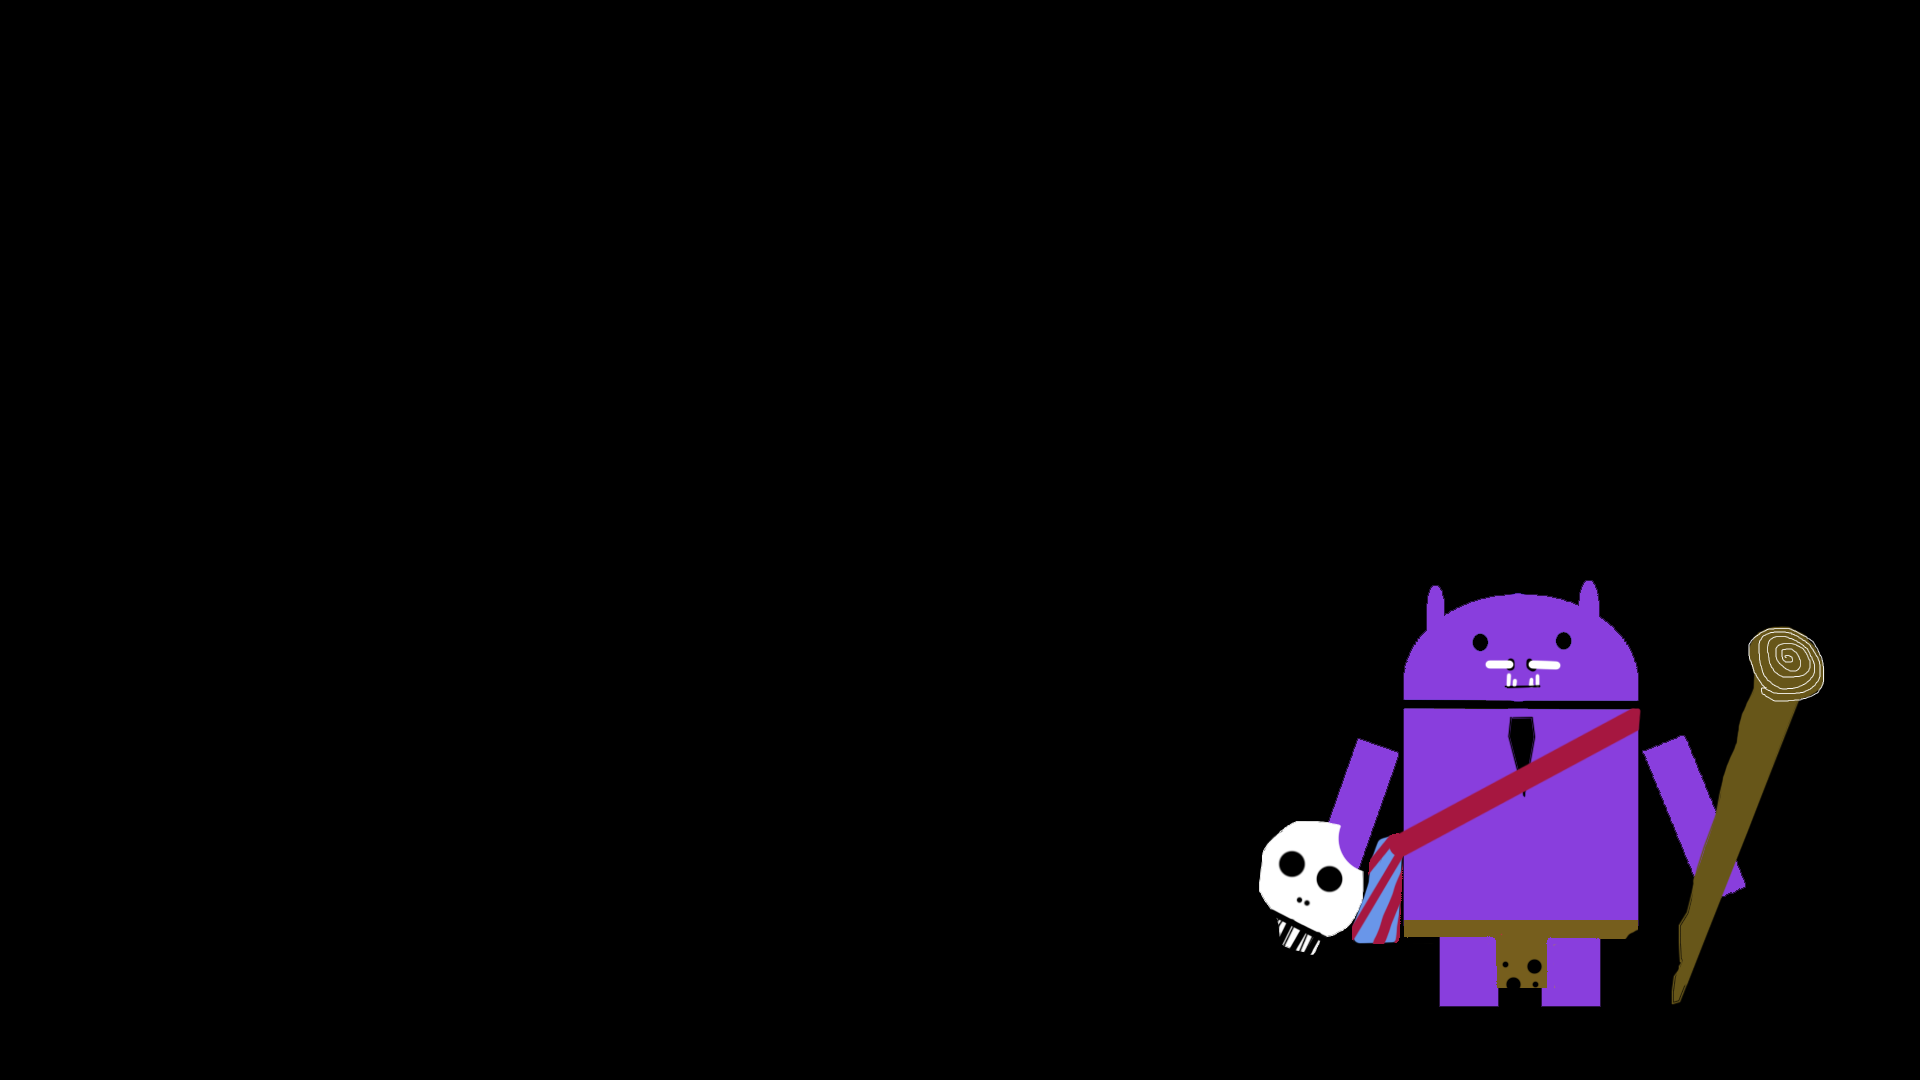 General 1920x1080 Microsoft Windows Android (operating system) Witch Doctor (character) Dota 2 androidify